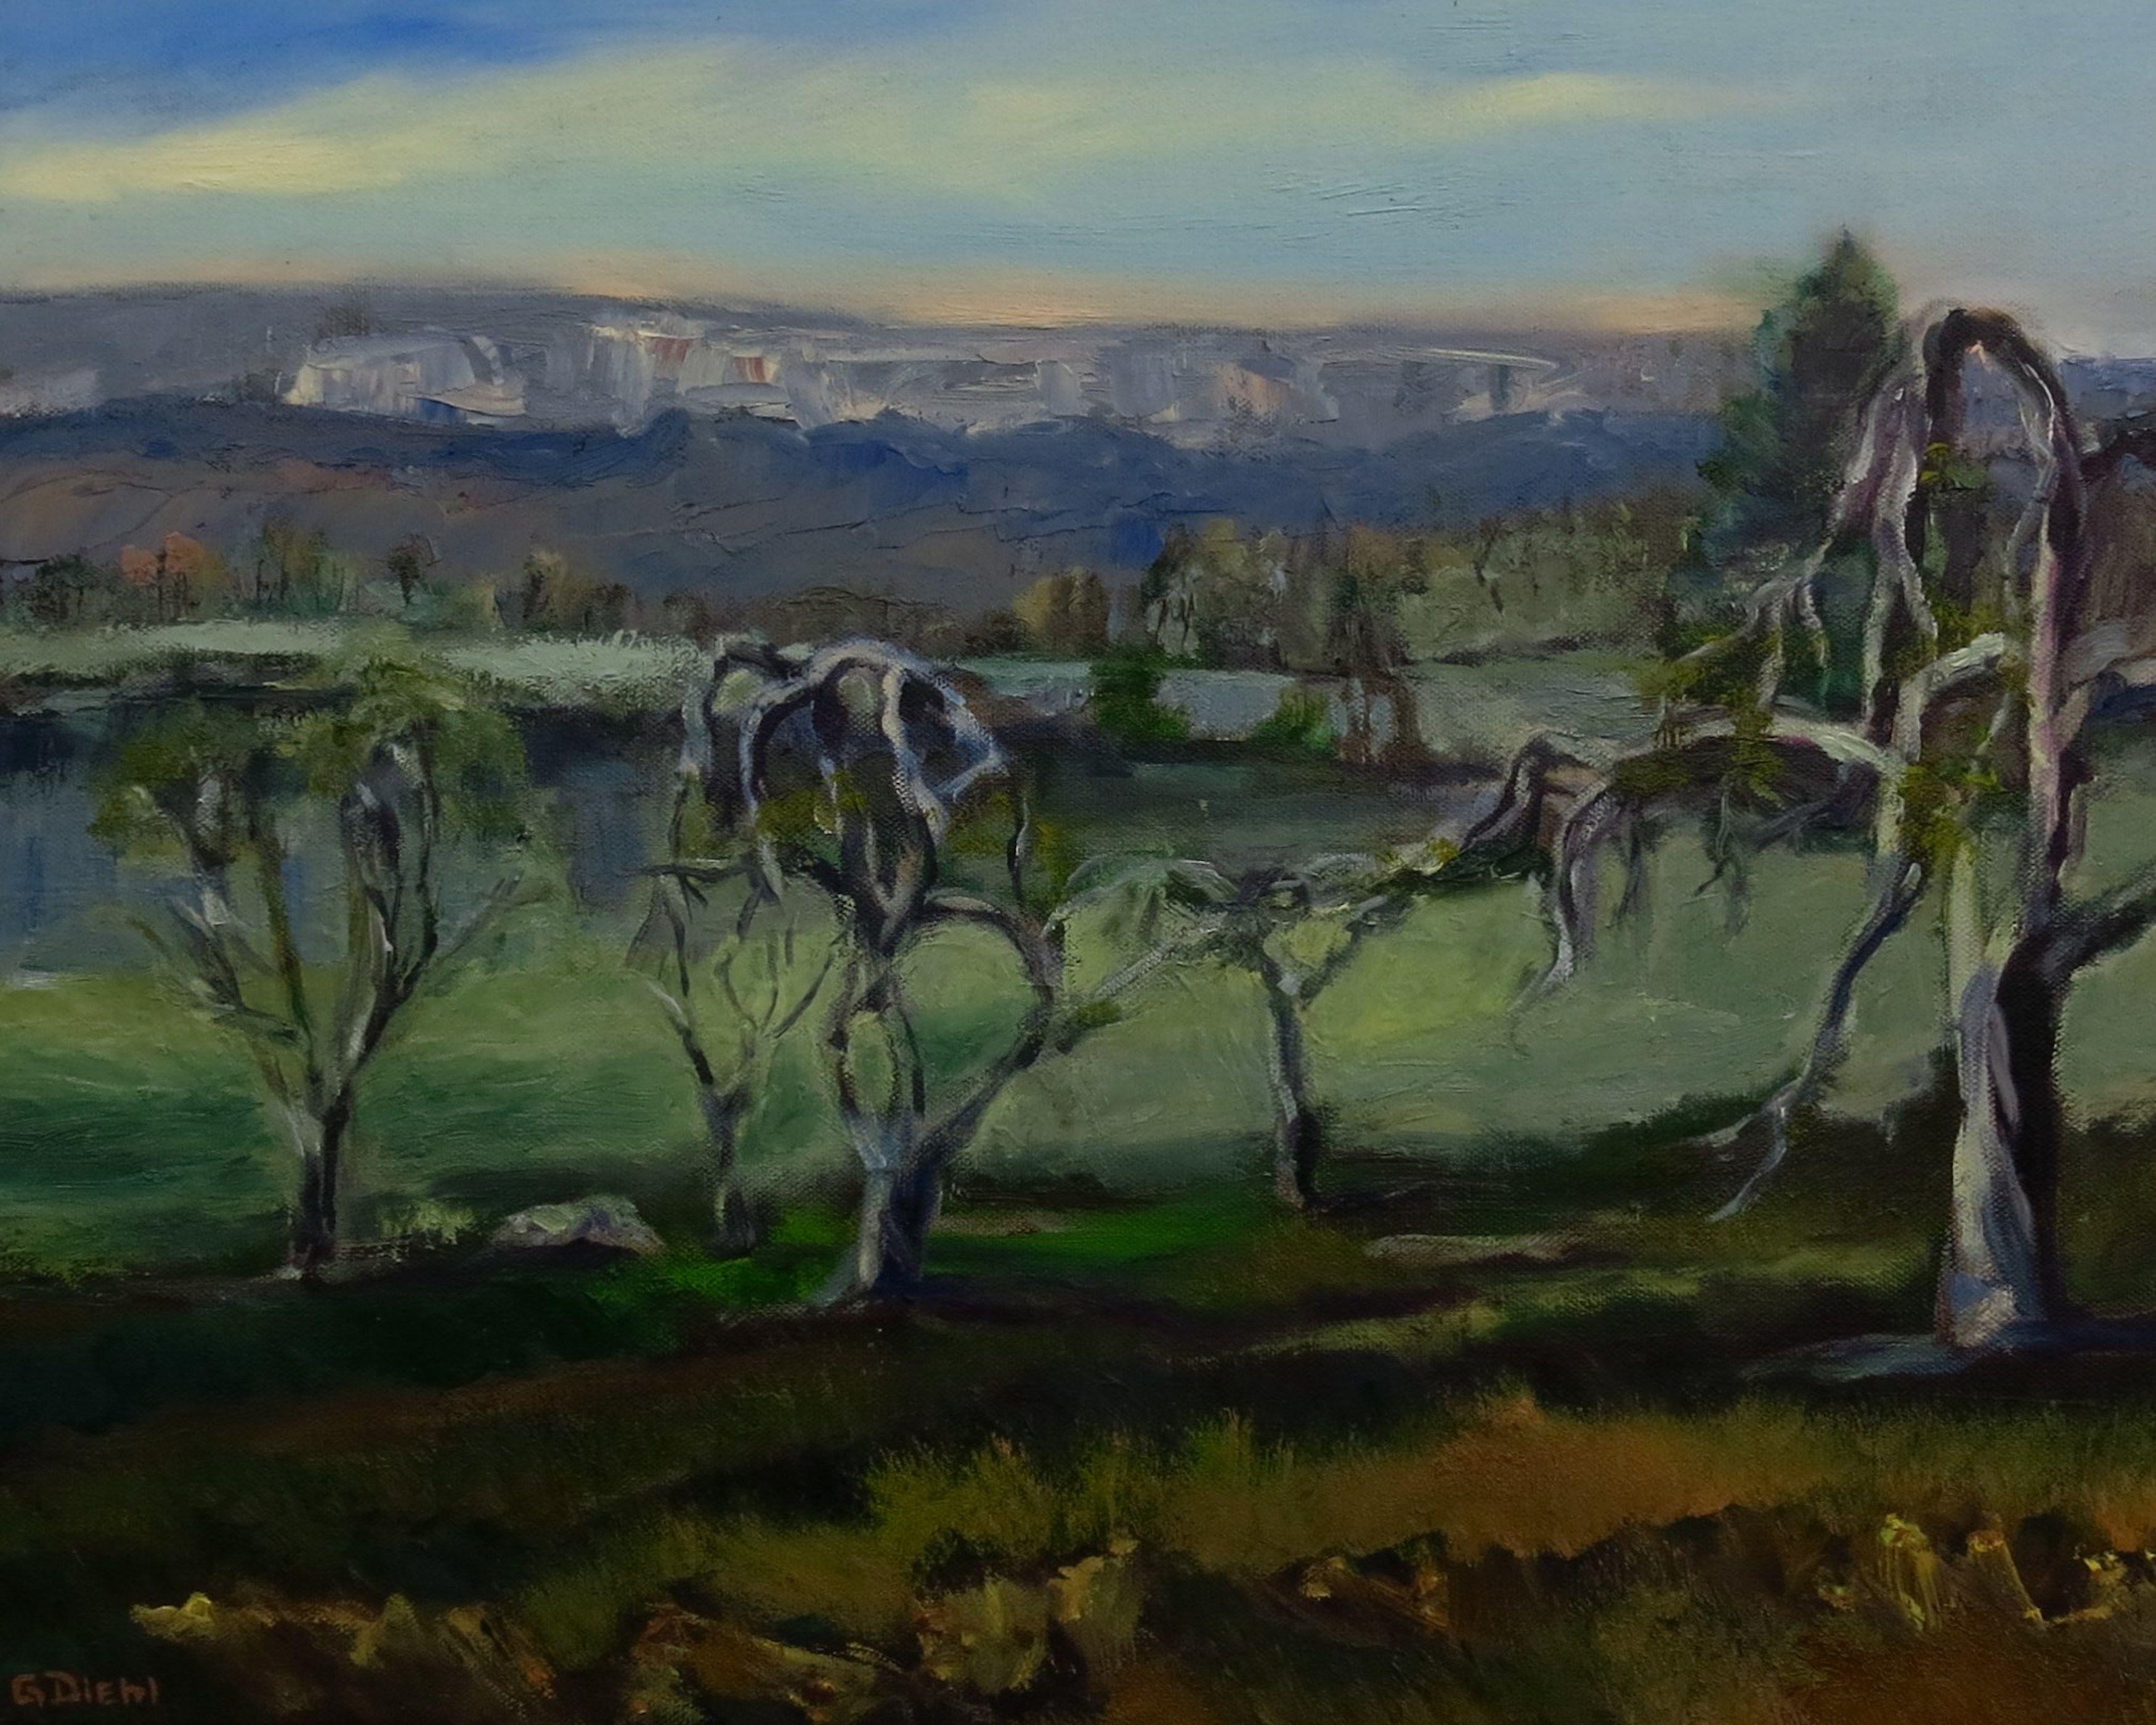 In this representational, oil painting of the New Paltz area of New York, USA, bare apple trees are featured. Characteristic of these trees are their twisted appearance. In the background, the Mohonk Mountains are displayed;  a favorite spot for